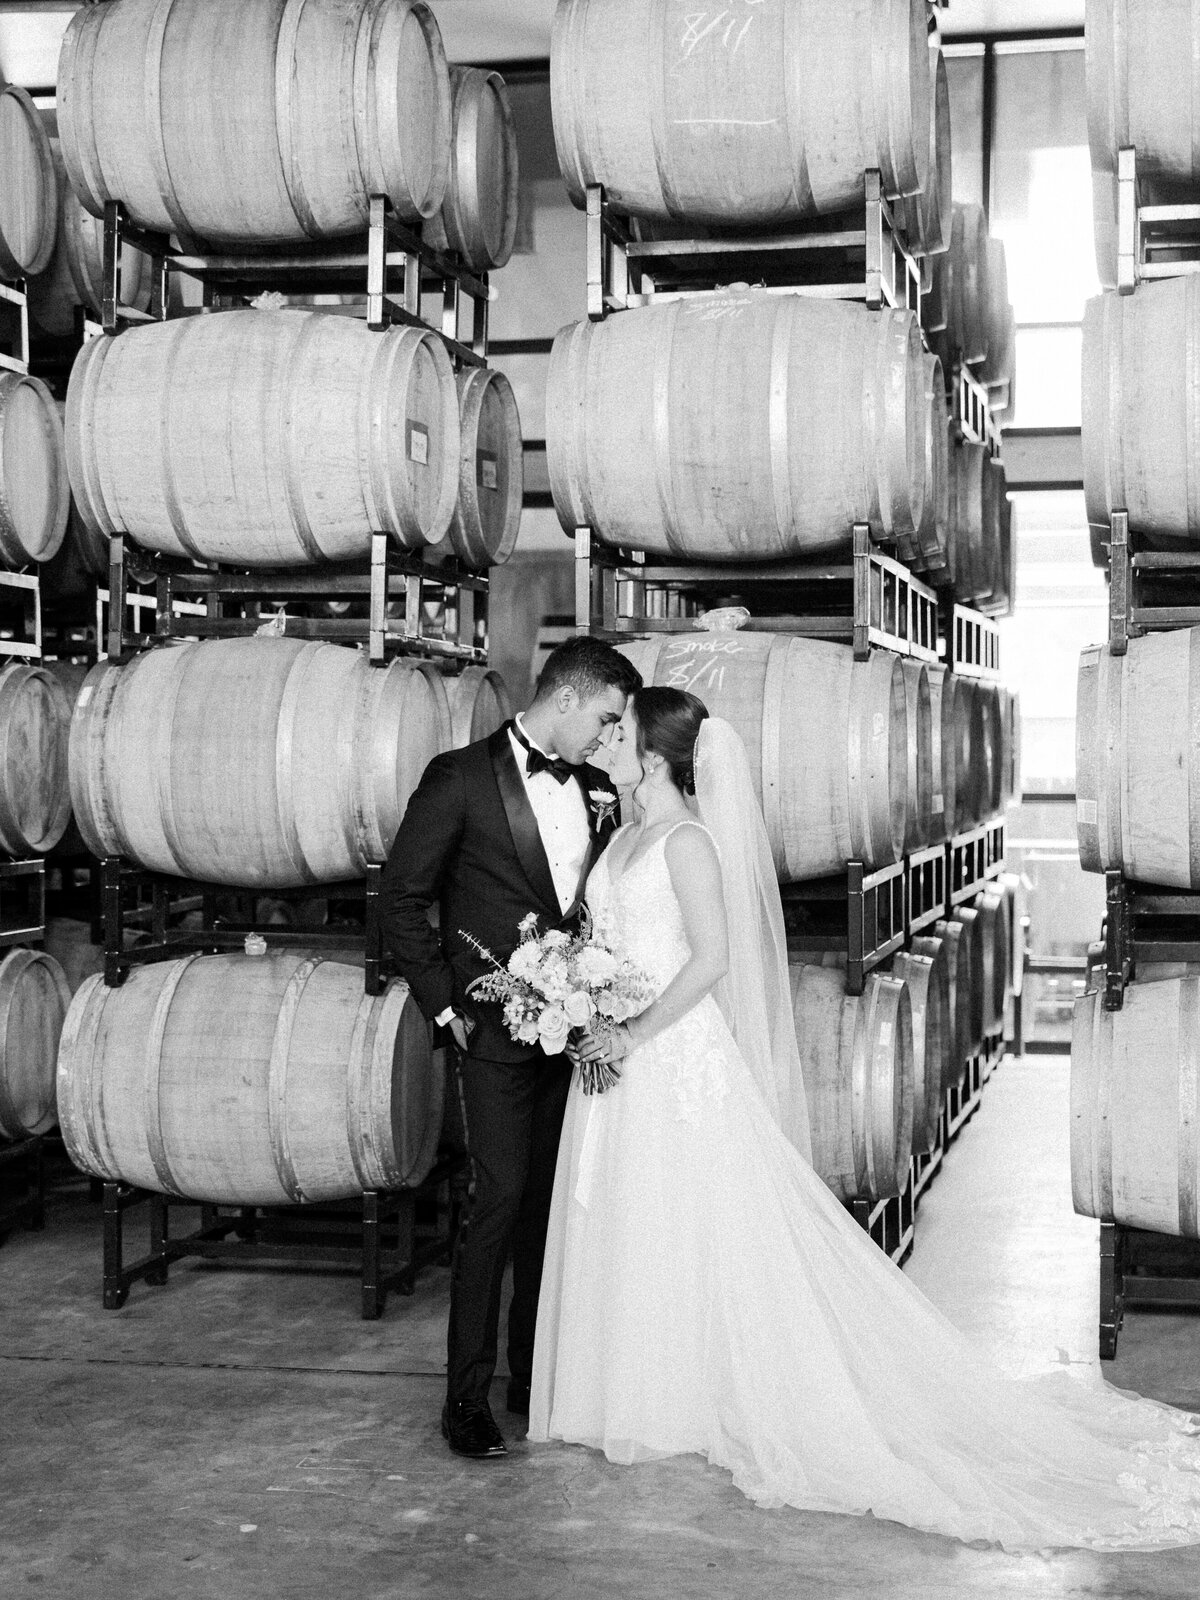 A bride and groom share a kiss in the wine cellar at district winery in washington dc